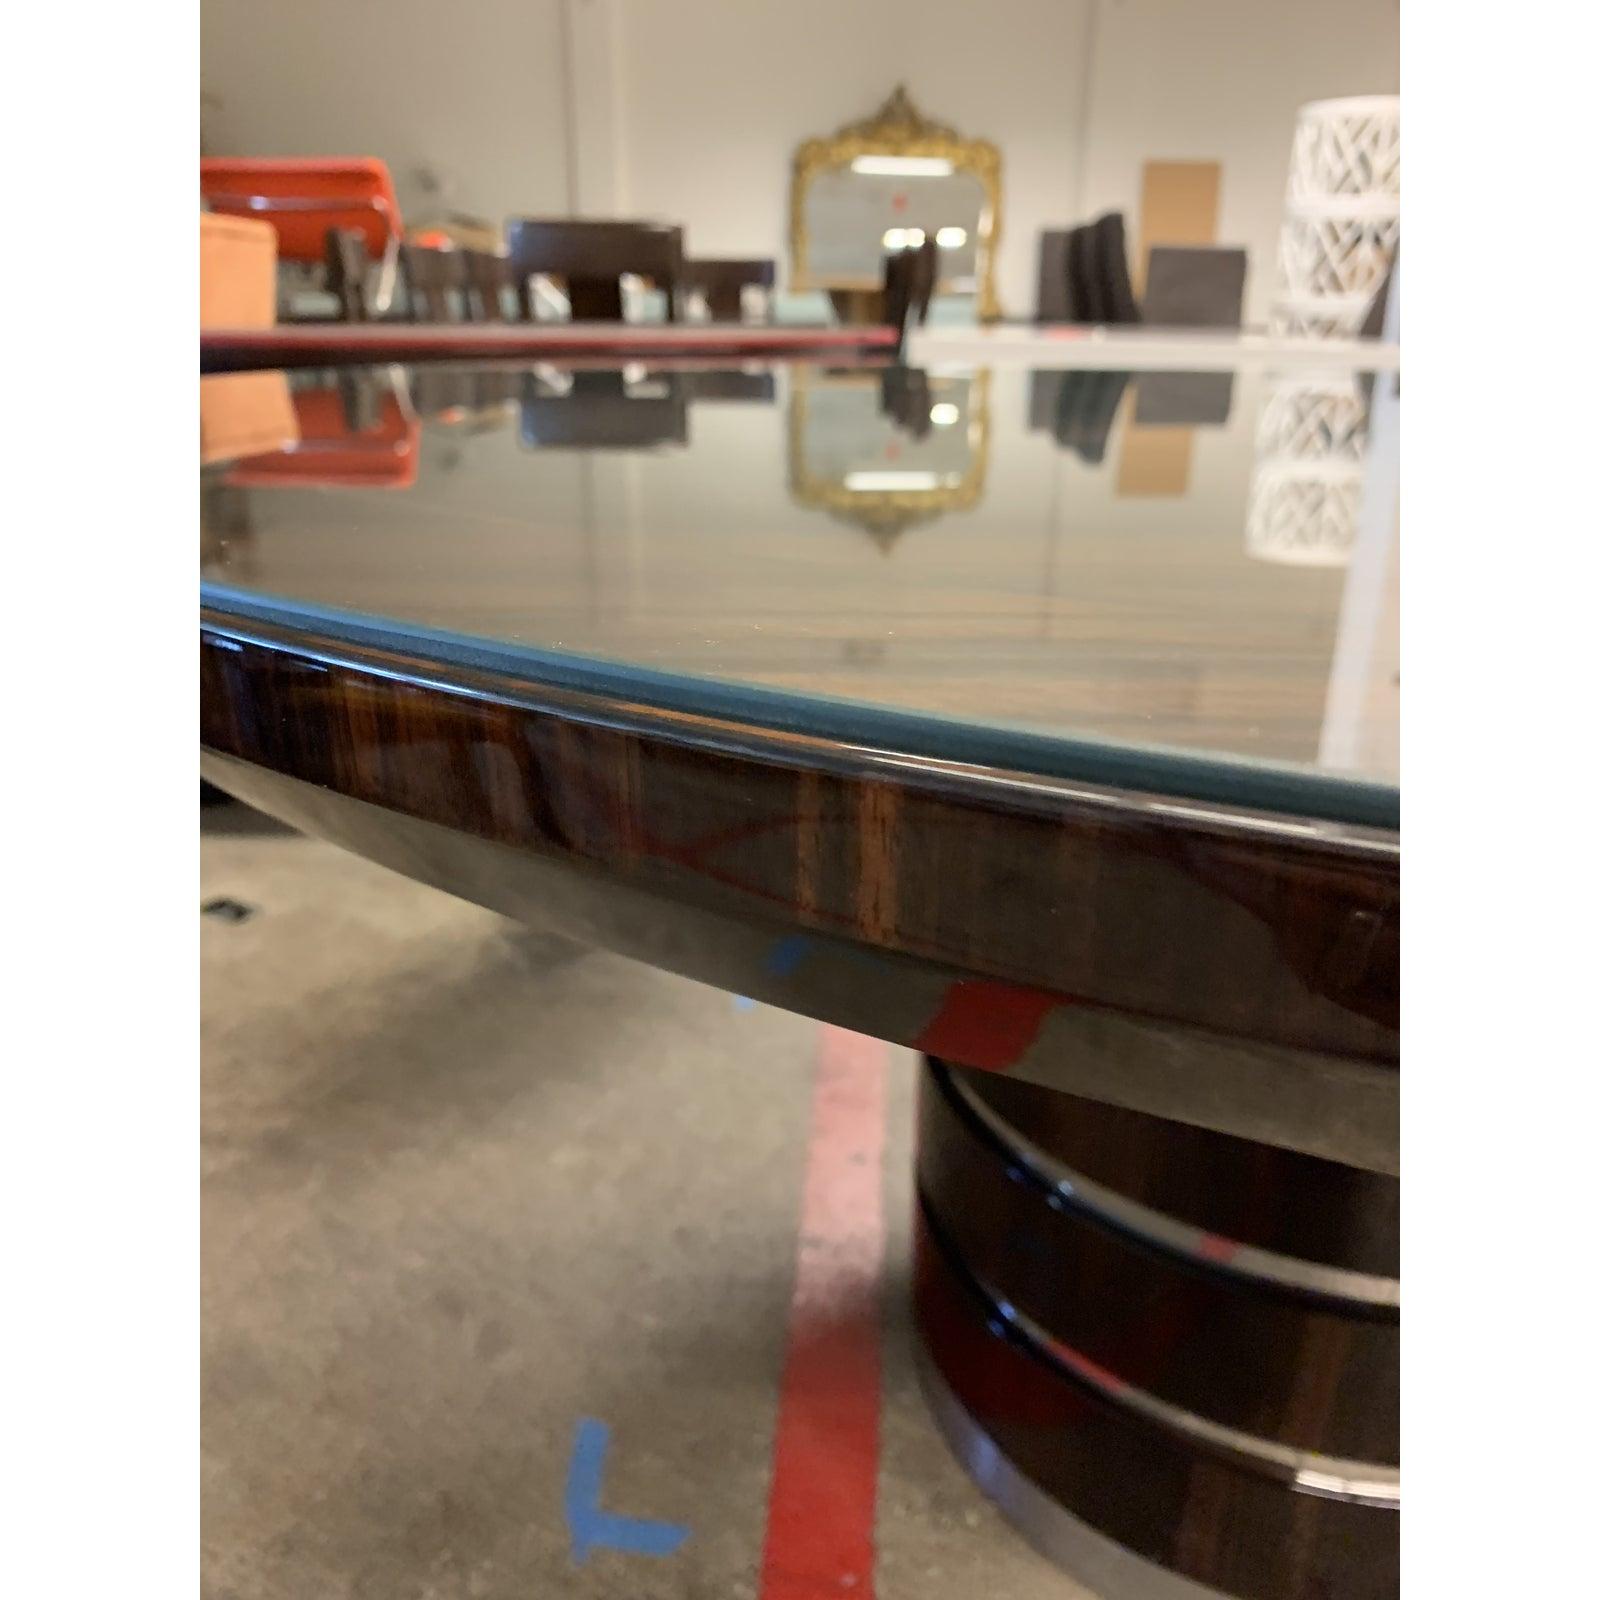 A round table by Giorgio. From the Luna collection. A round dining table with inlay top in ebony Macassar with 6mm filet in Zebra veneer in high gloss polyester. Brushed and chrome stainless steel details on the table’s legs. A custom cut glass sits